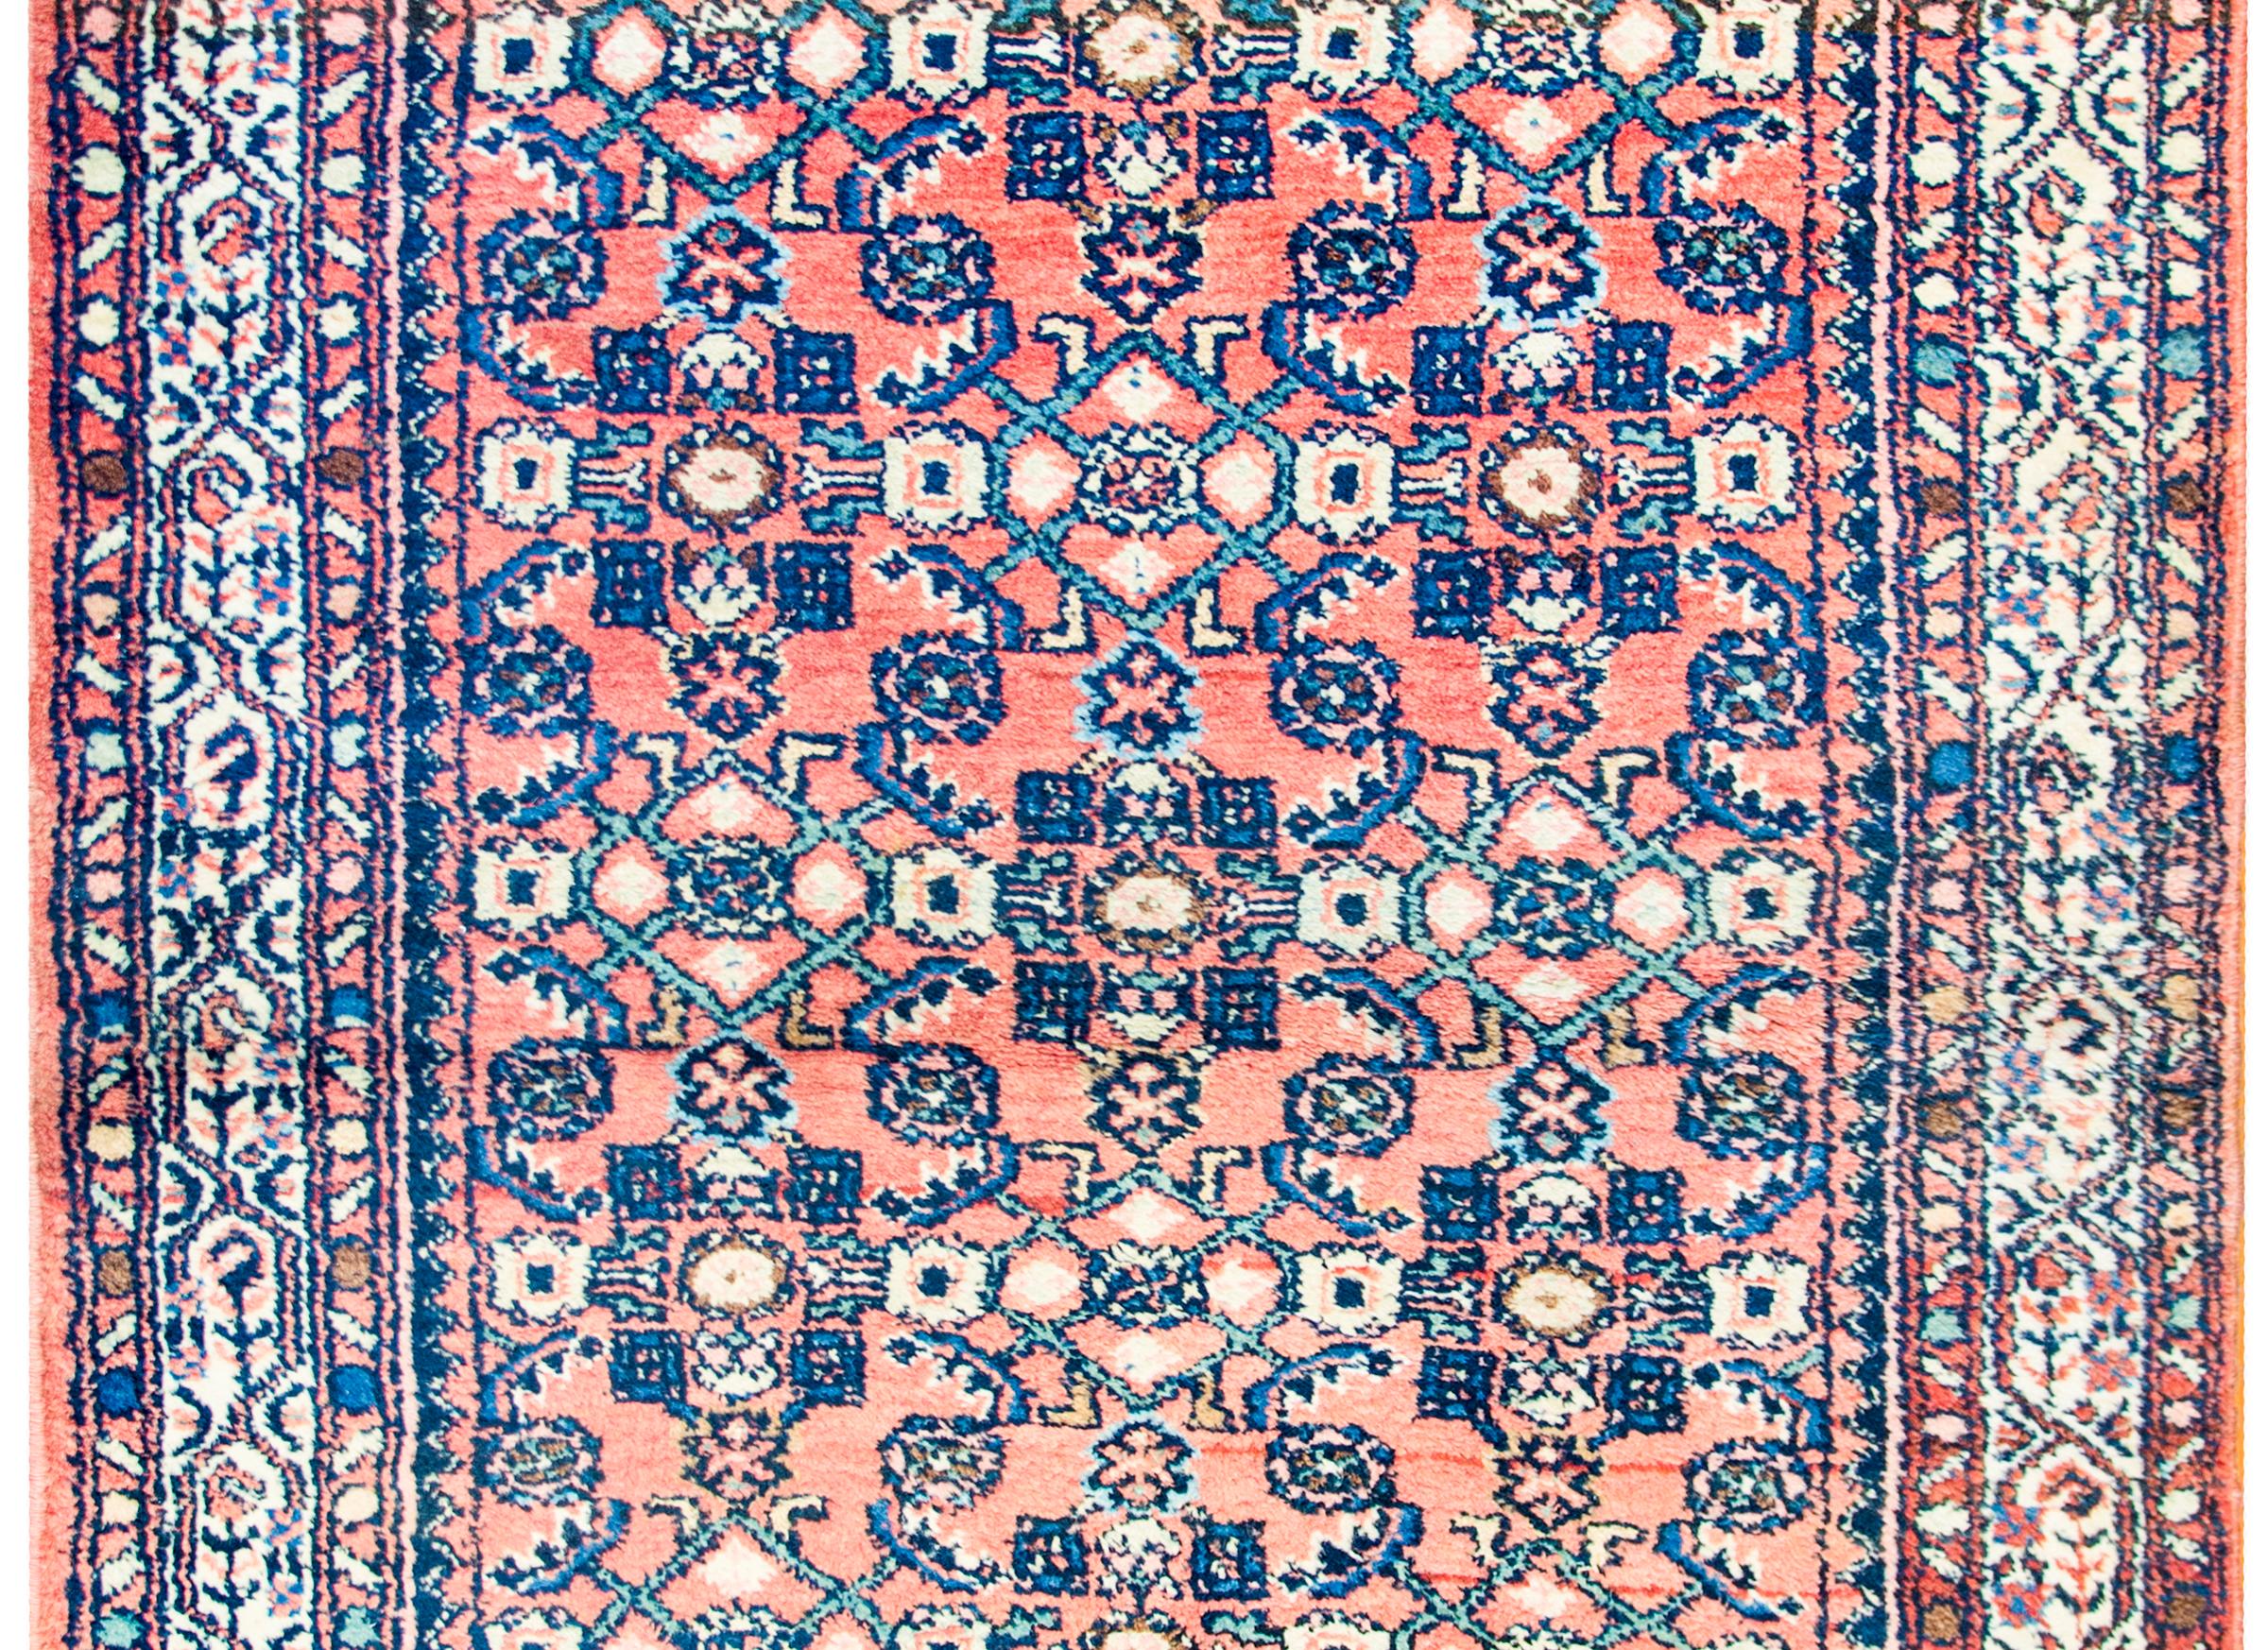 Early 20th century Persian Herati rug with a fantastic trellis and stylized floral pattern woven in indigo and cream colored wool, in an abrash crimson background surrounded by a border with a stylized floral patterned central stripe flanked by two